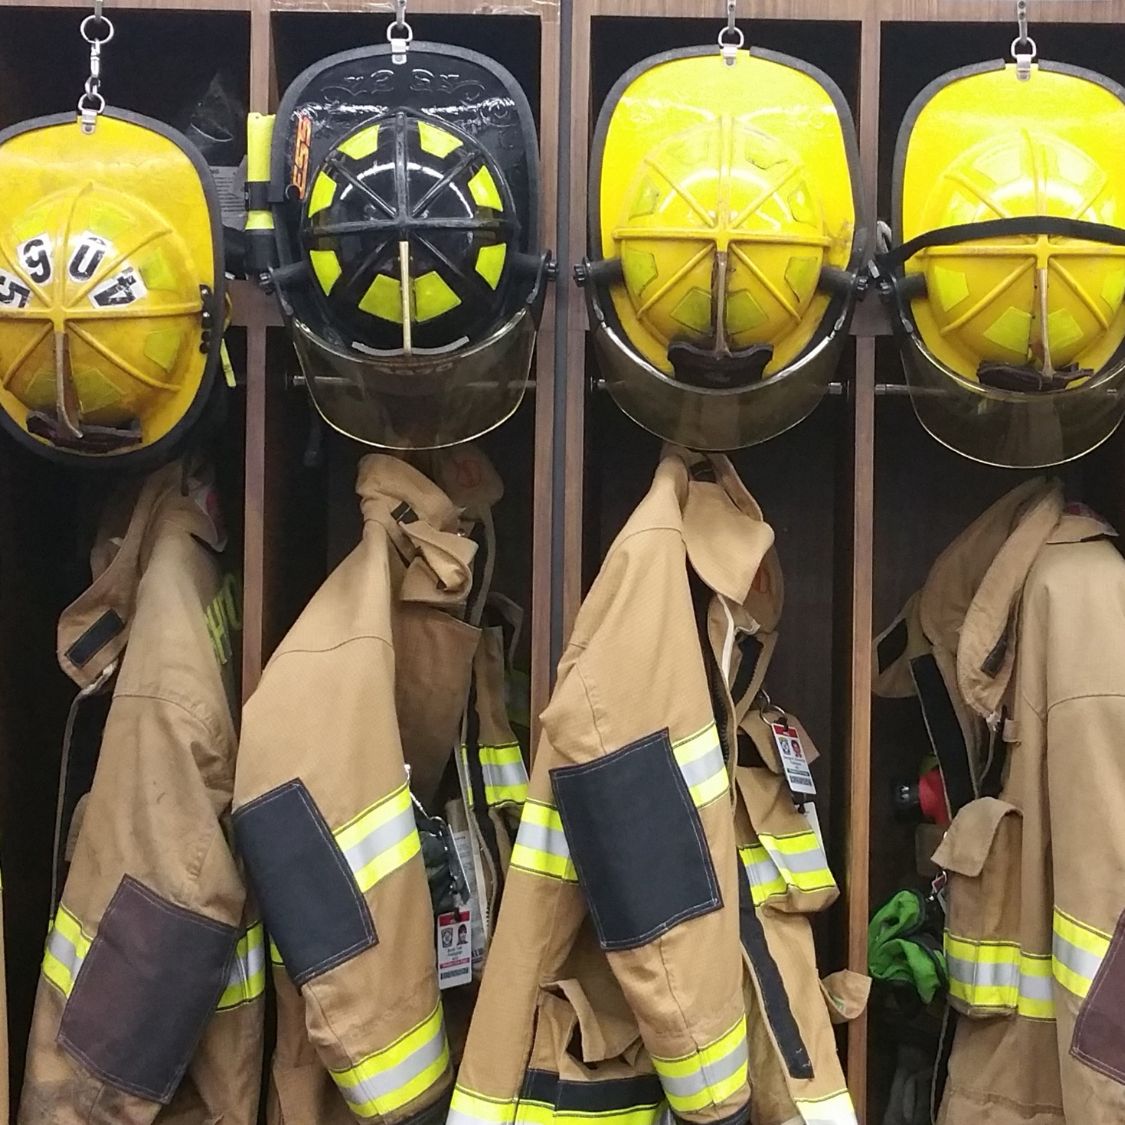 How To Choose the Right Firefighter Helmet for You